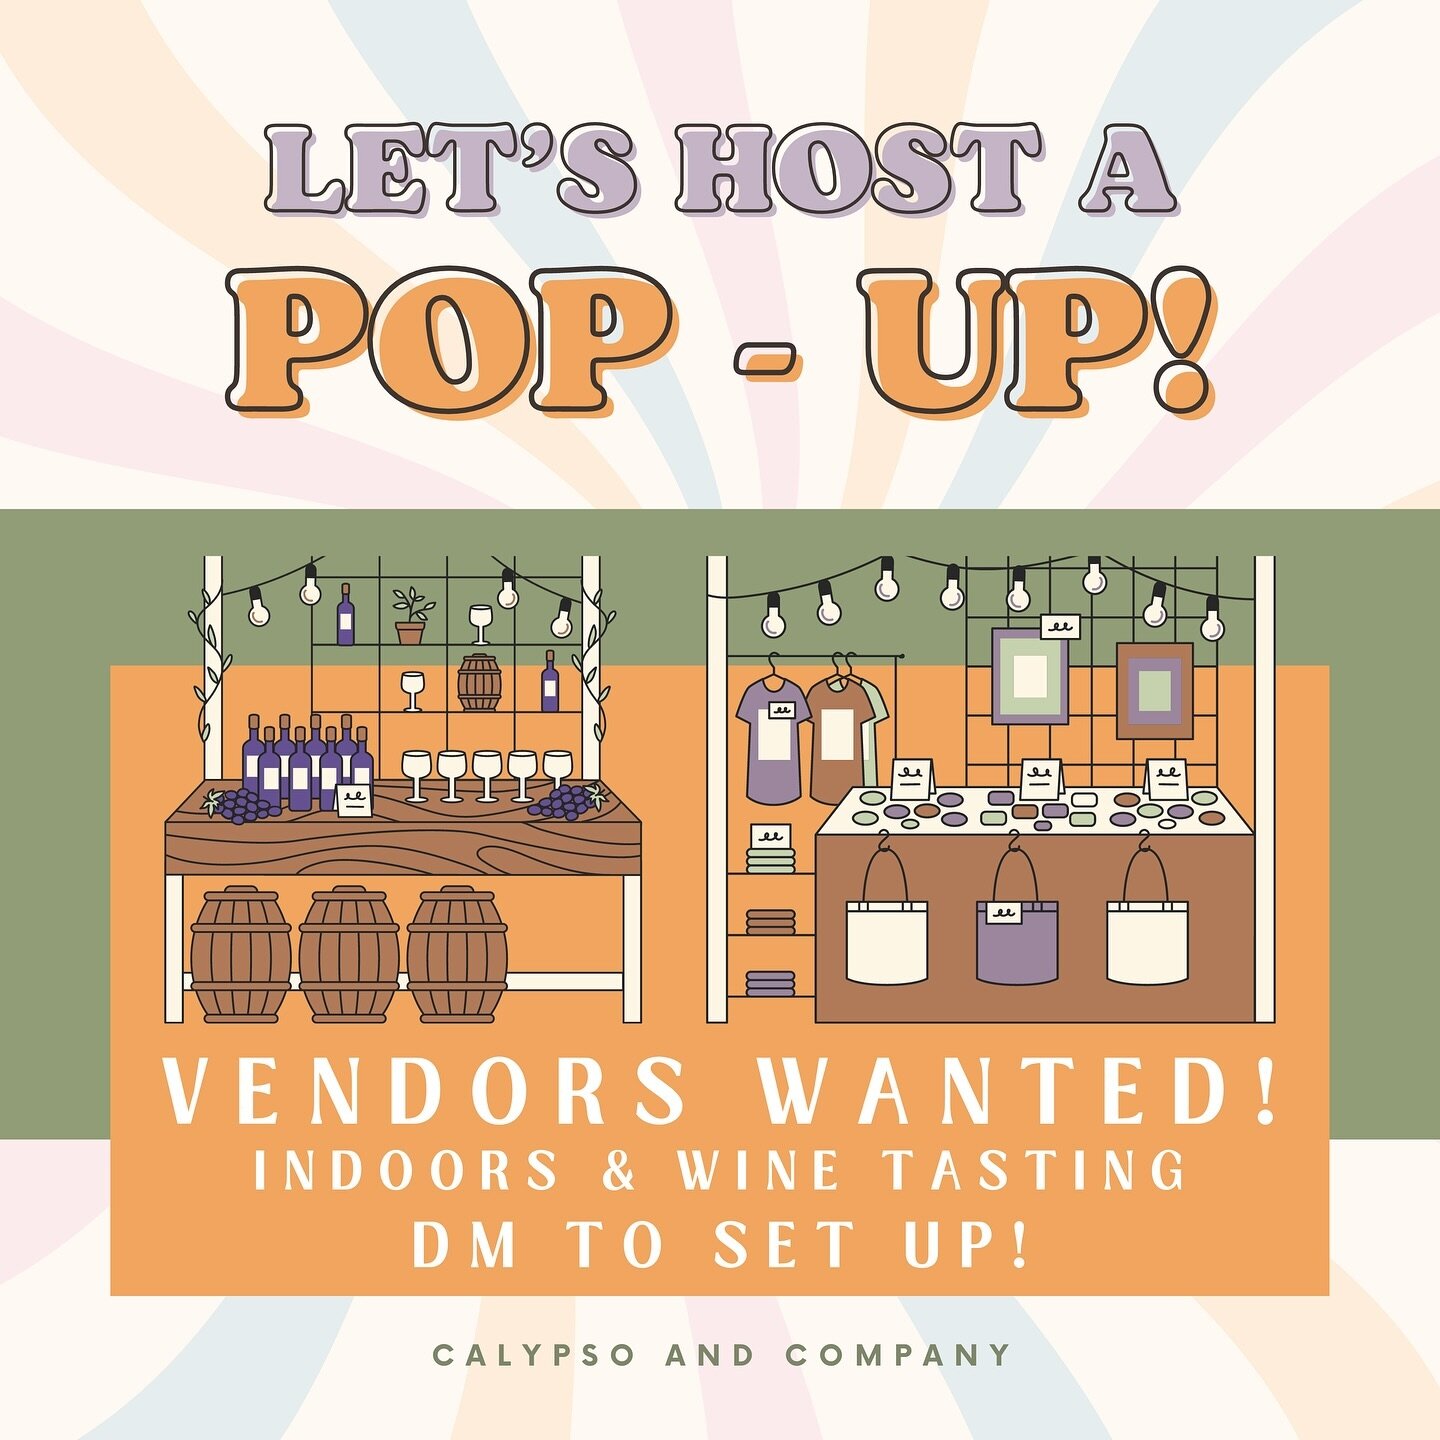 Want to host a Pop Up at Calypso &amp; Company?
Let&rsquo;s make it happen!! 🙌🏼
DM for more info!